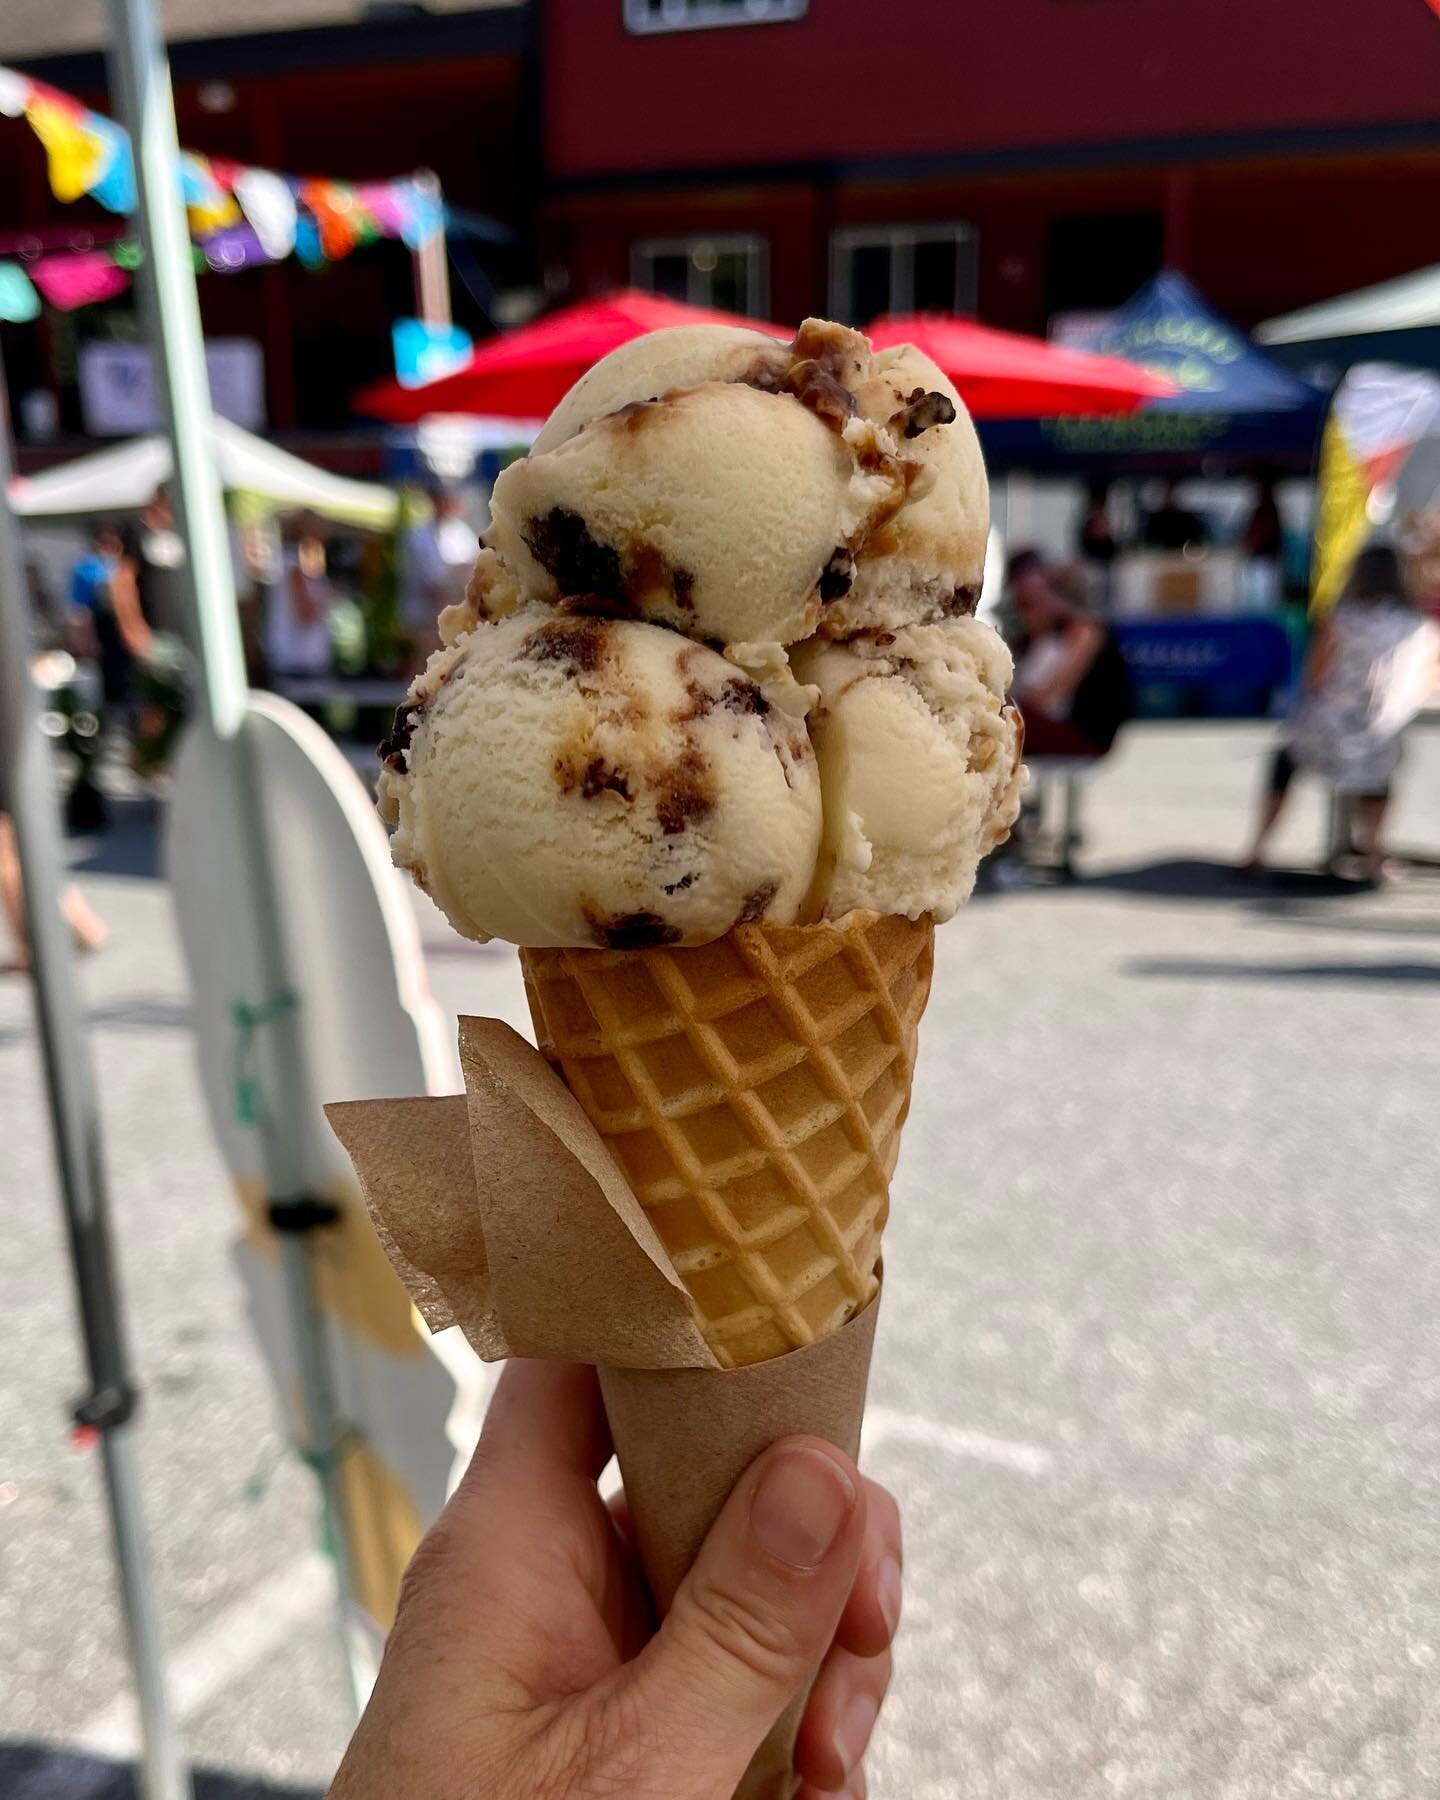 Big weekend! Find Ashley at the @gibsonspublicmarket night market for scoops tonight until 10! Or find Kali who is doing a special guest appearance tonight at @sundaycider where there will be live music starting at 8!